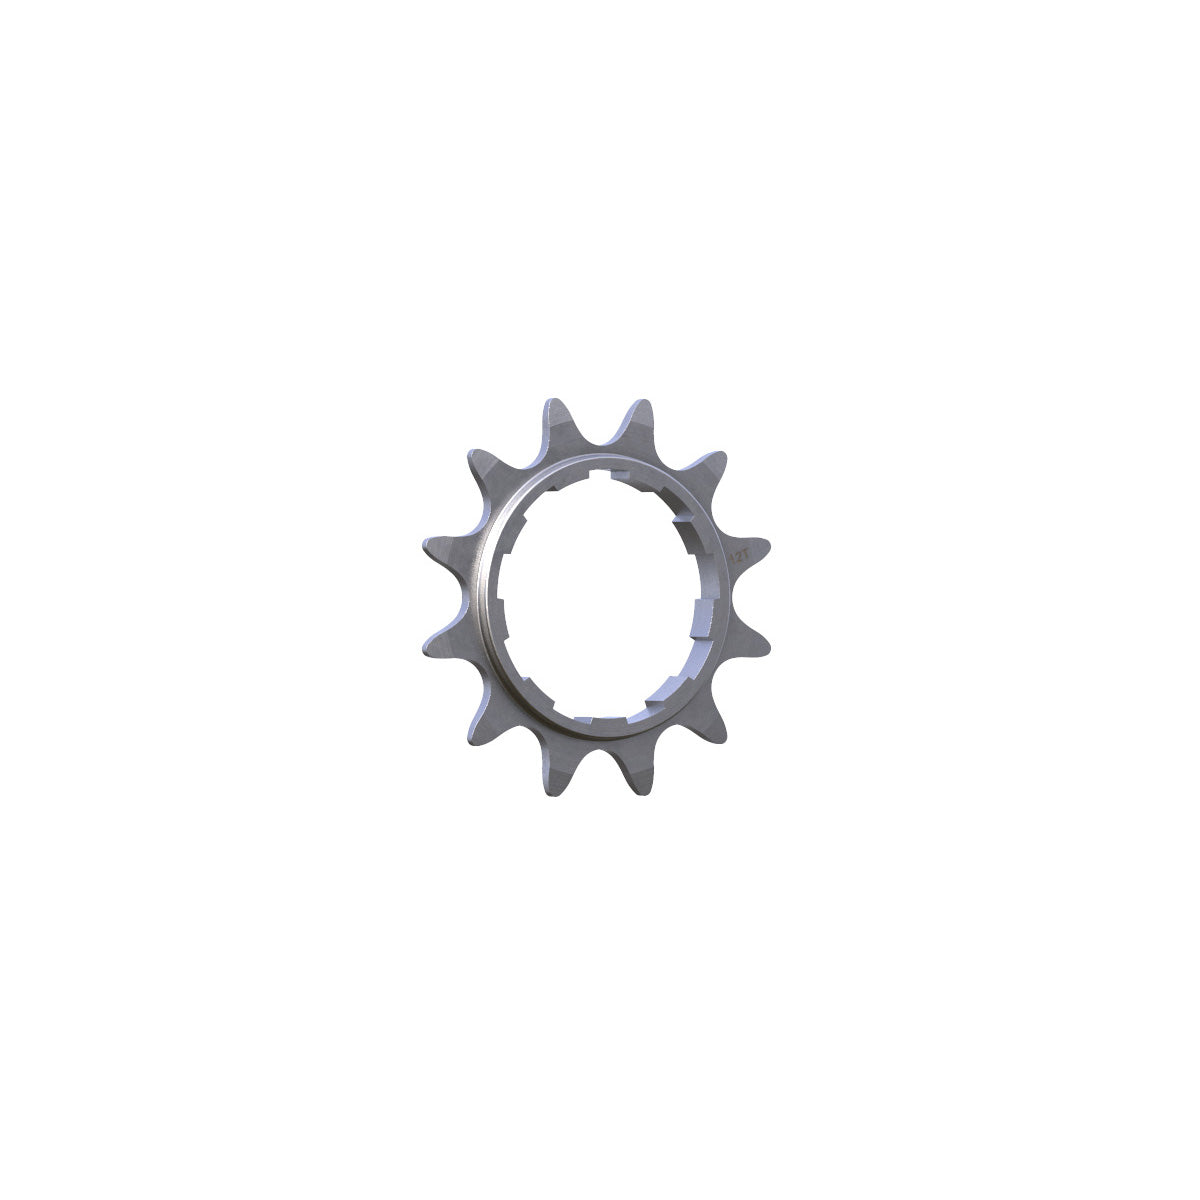 Onyx Racing 12t Stainless Steel Cog for BMX Cassette hubs - 3/32"